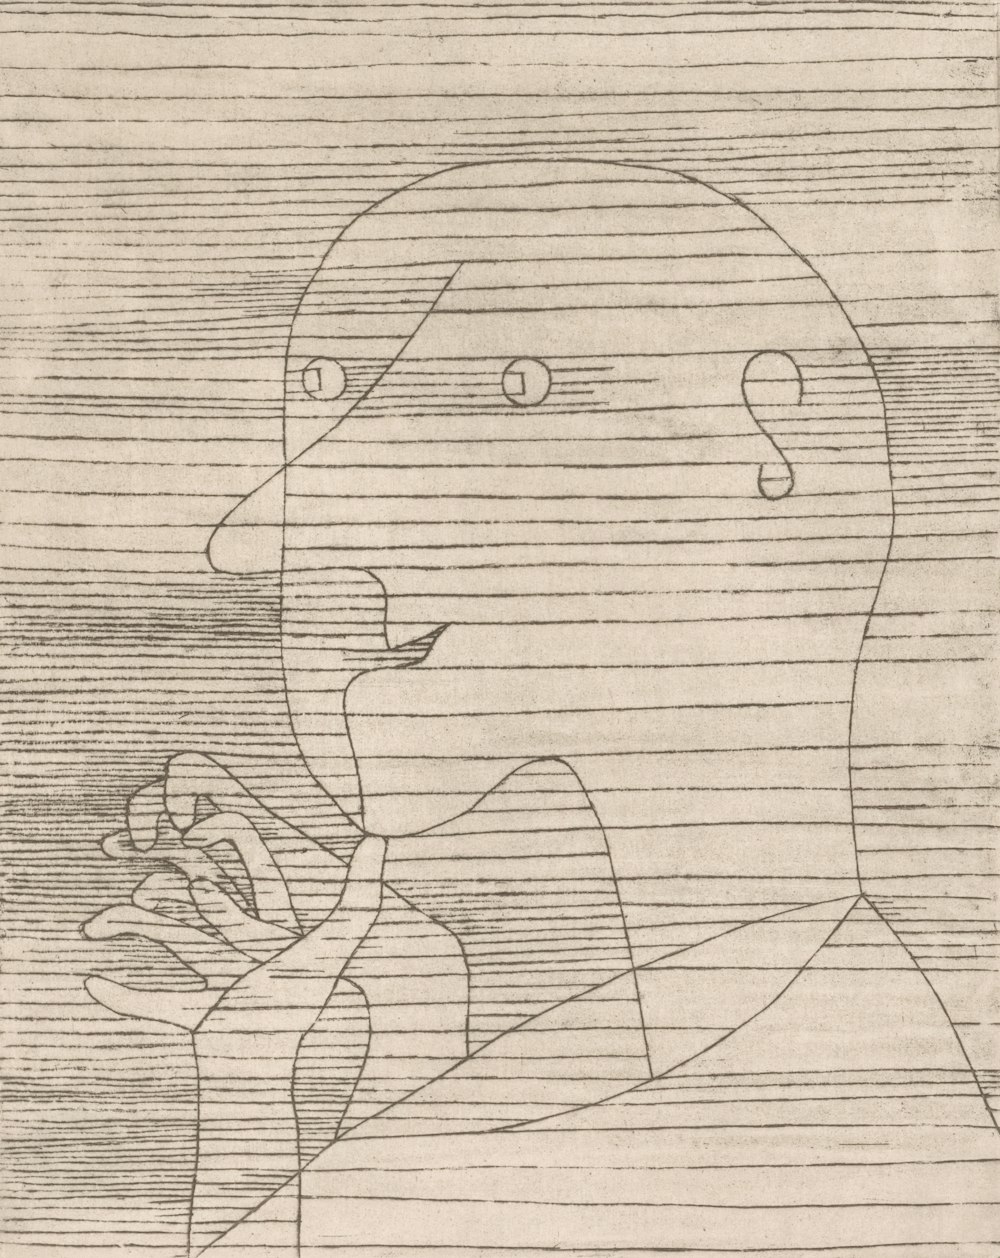 a drawing of a person holding a cigarette